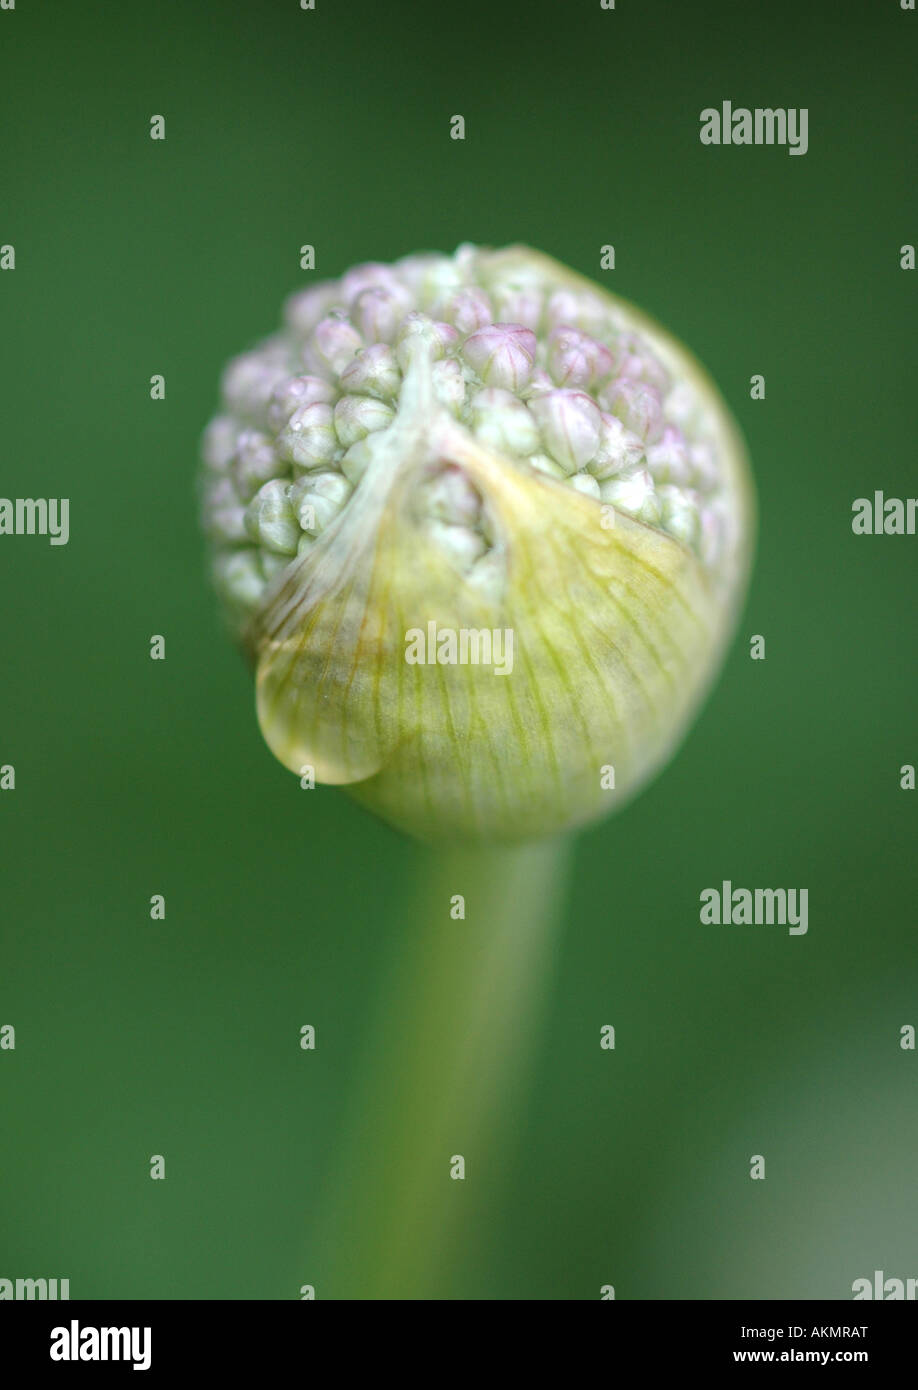 Allium bud with water droplet Stock Photo